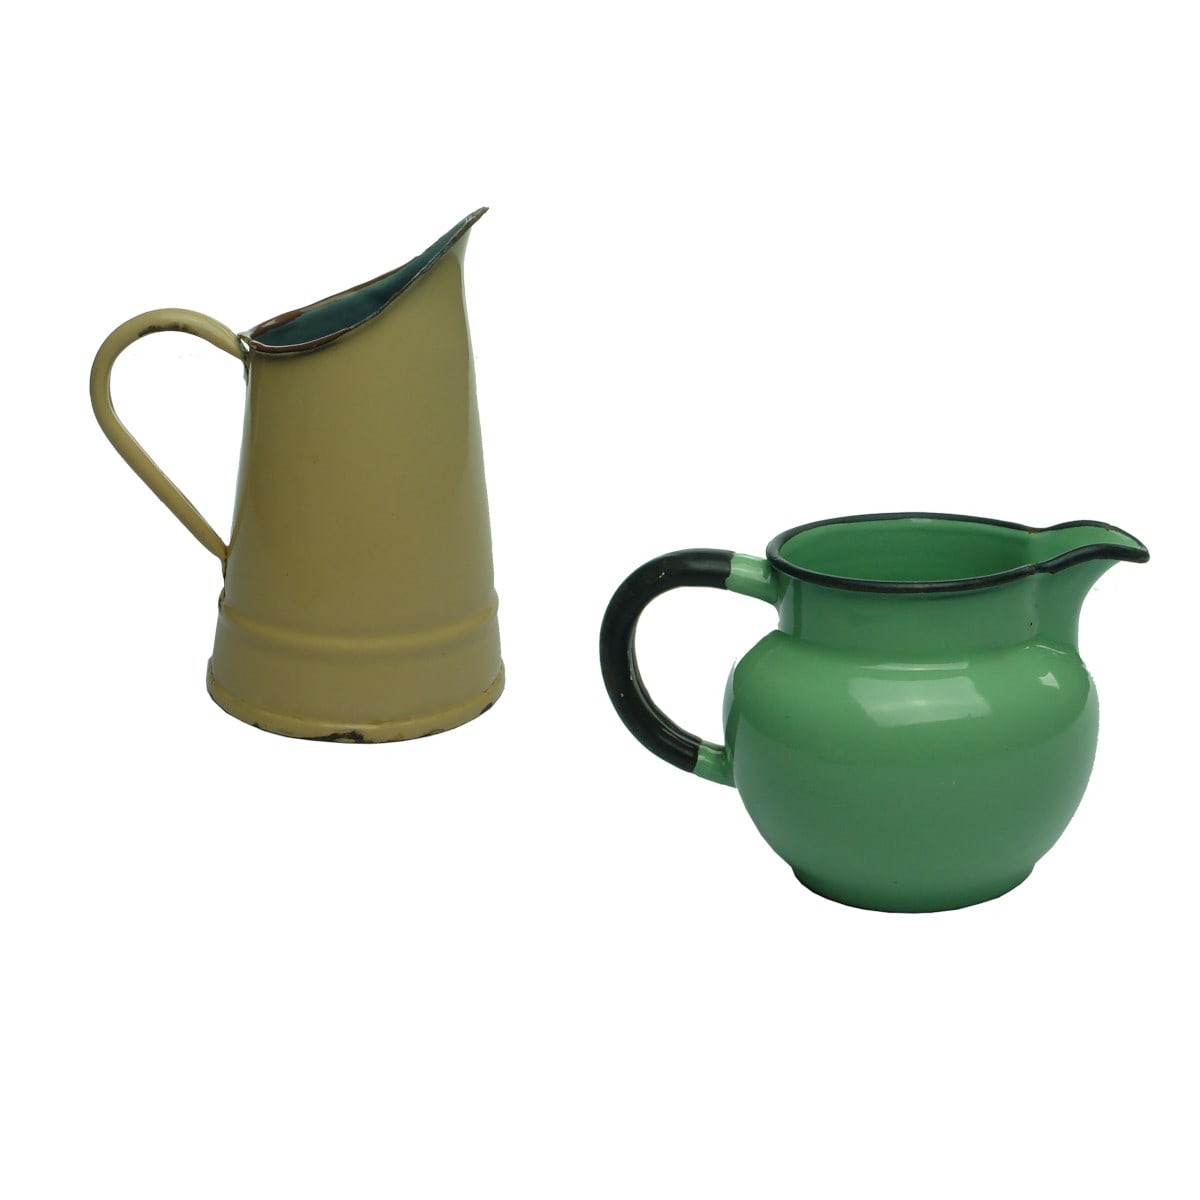 2 enamel pouring jugs. Light/Dark Brown with blue inside and Green & Black.